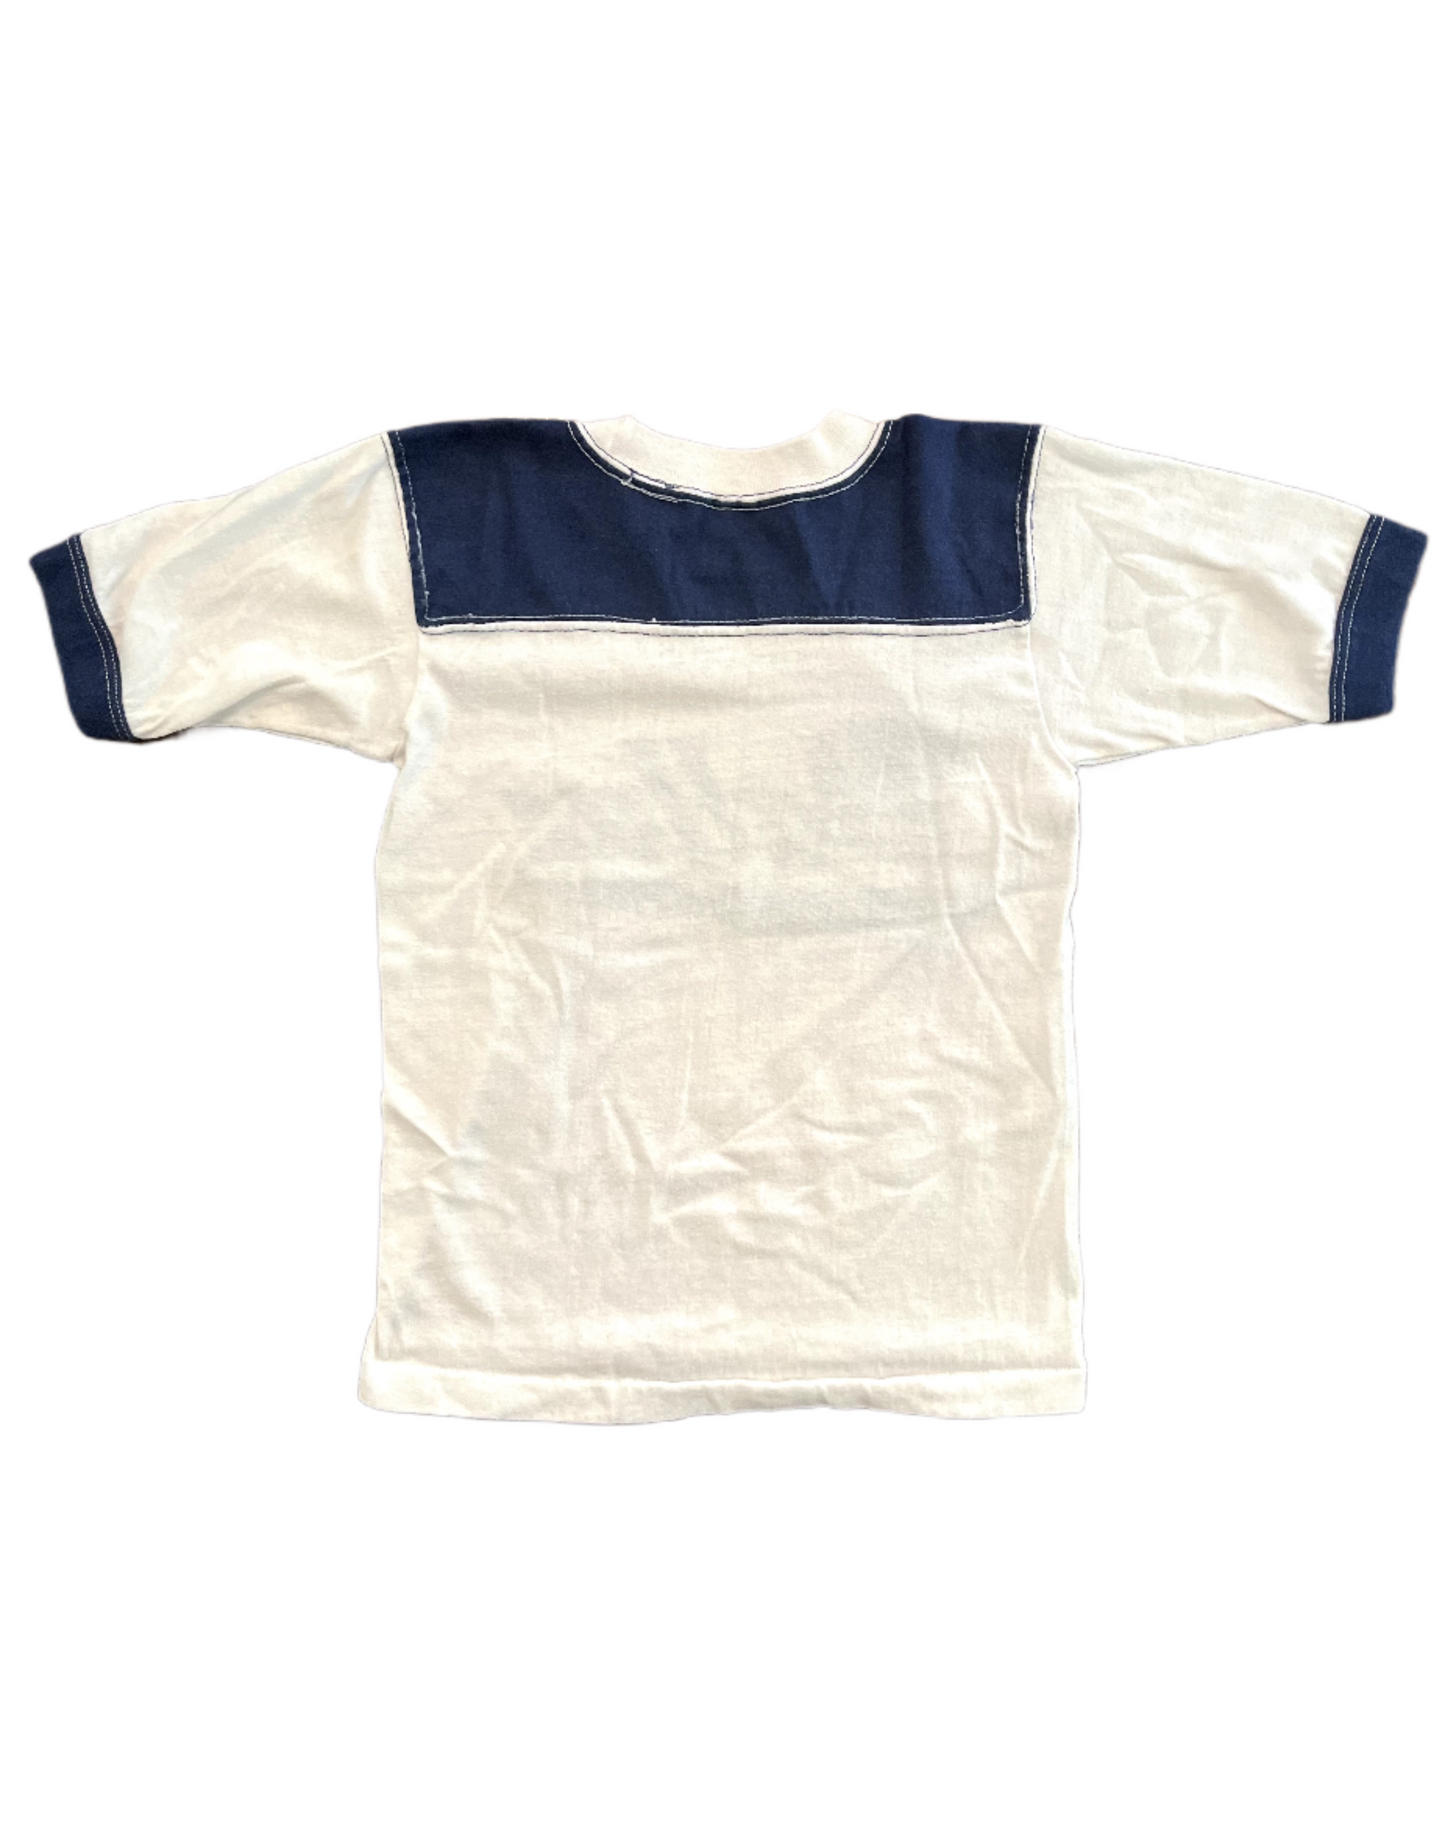 Image of vintage youth navy blue and white dallas cowboys tee on white background backside.